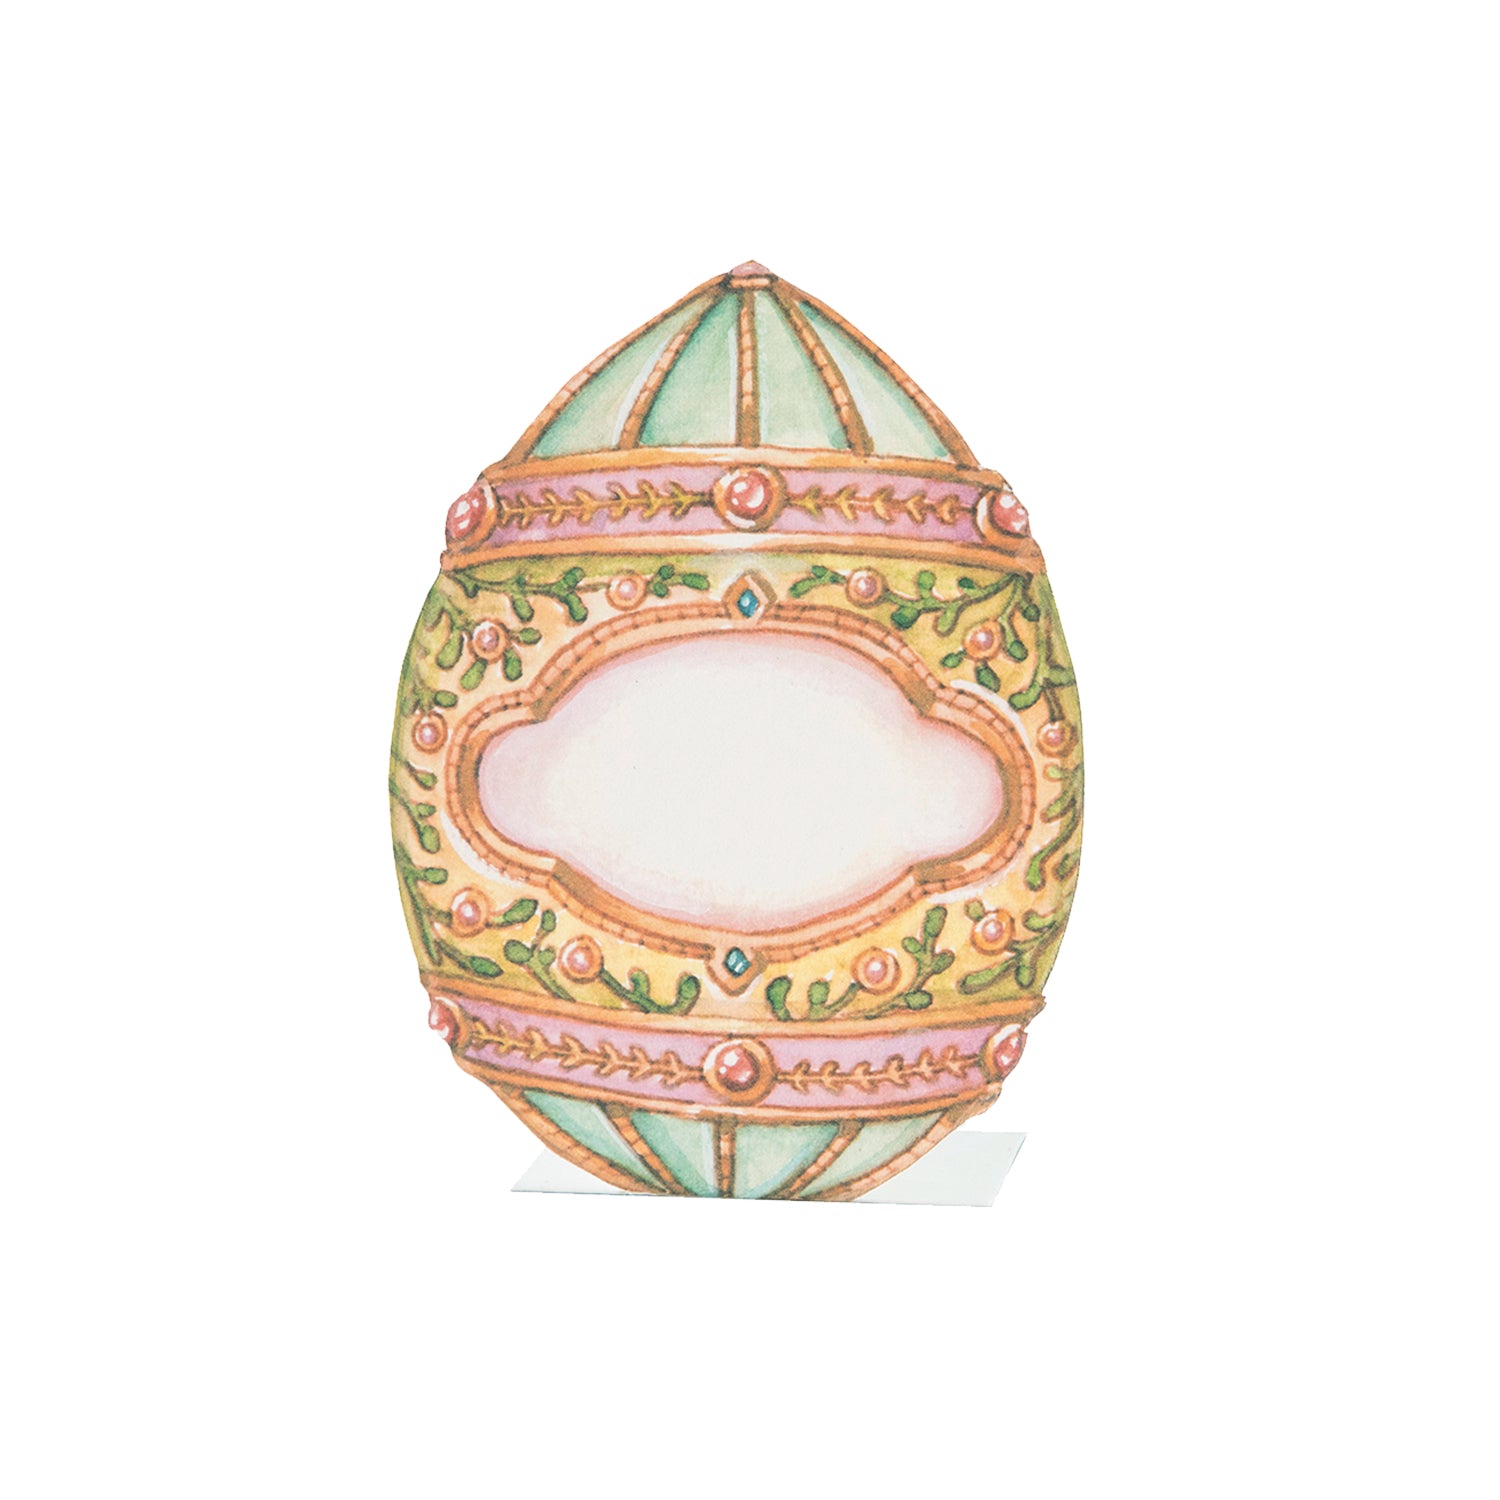 An Hester &amp; Cook Exquisite Egg Place Card with a writing space on a white background.